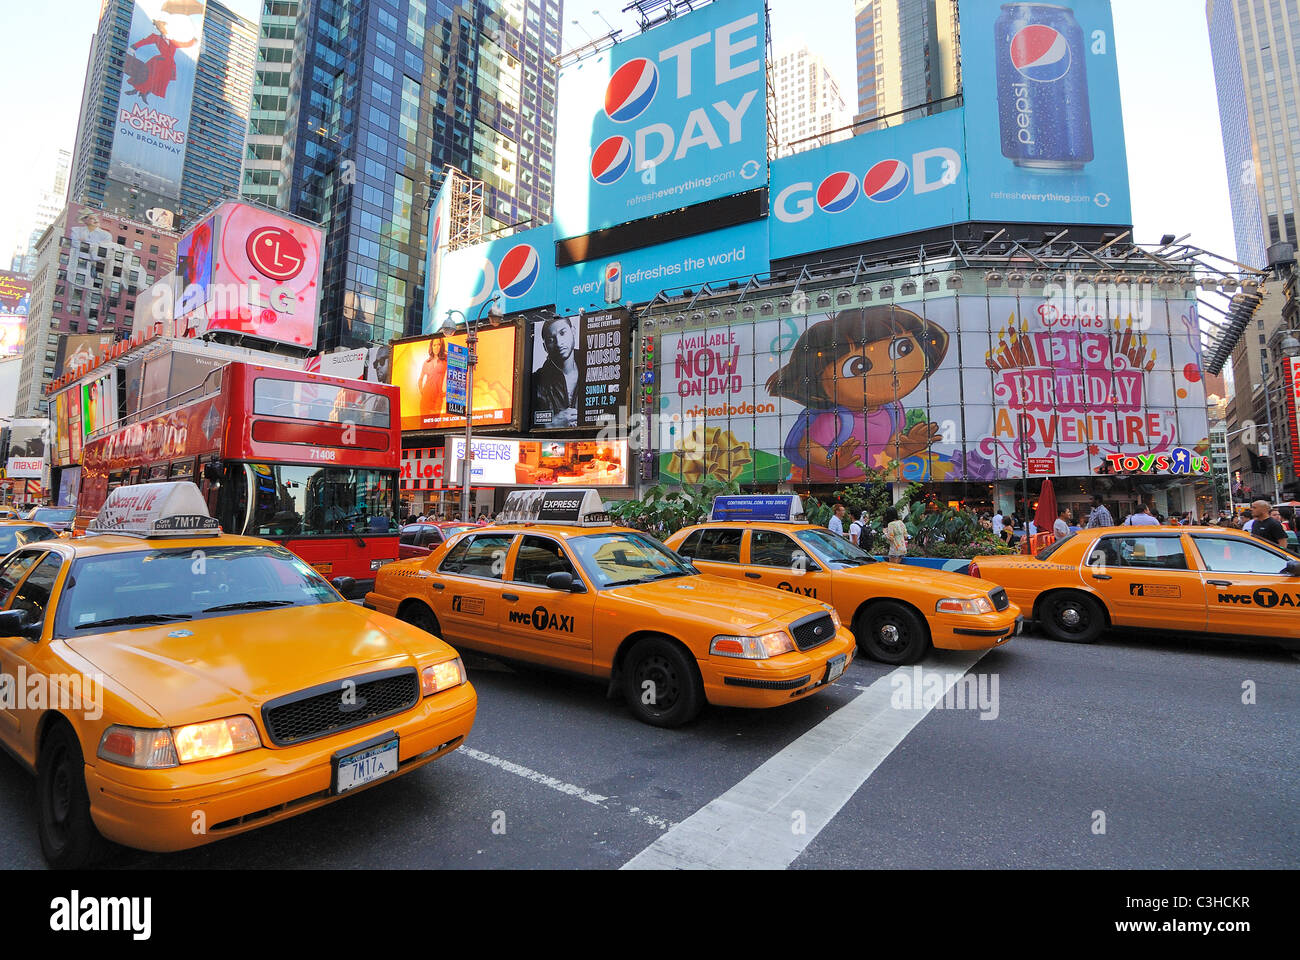 Crown Victoria Taxis on Broadway in Times Square, New York City may soon be replaced with Nissan Minivans. Stock Photo